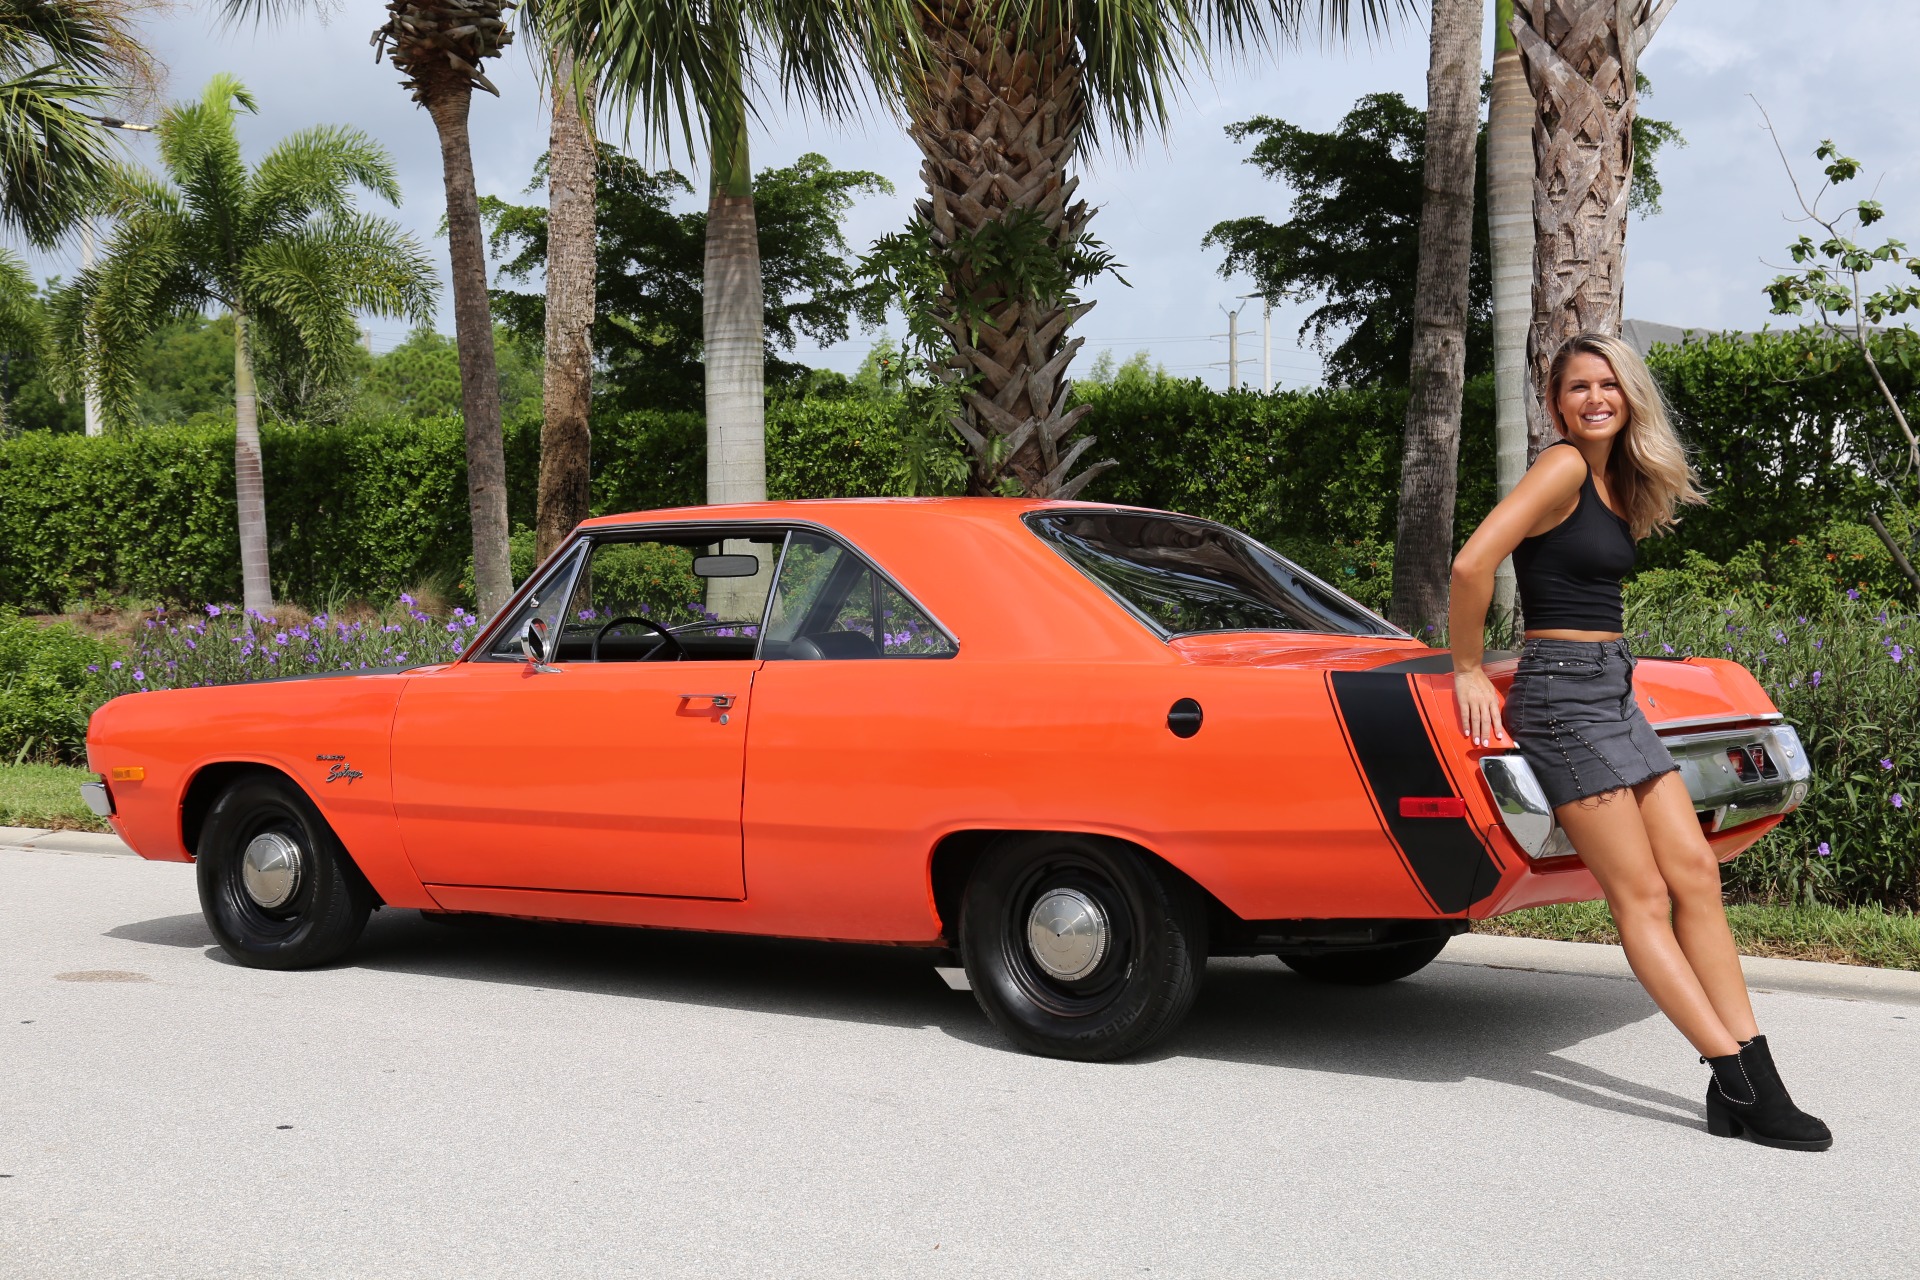 Used 1972 Dodge Dart Swinger For Sale ($19,900) Muscle Cars for Sale